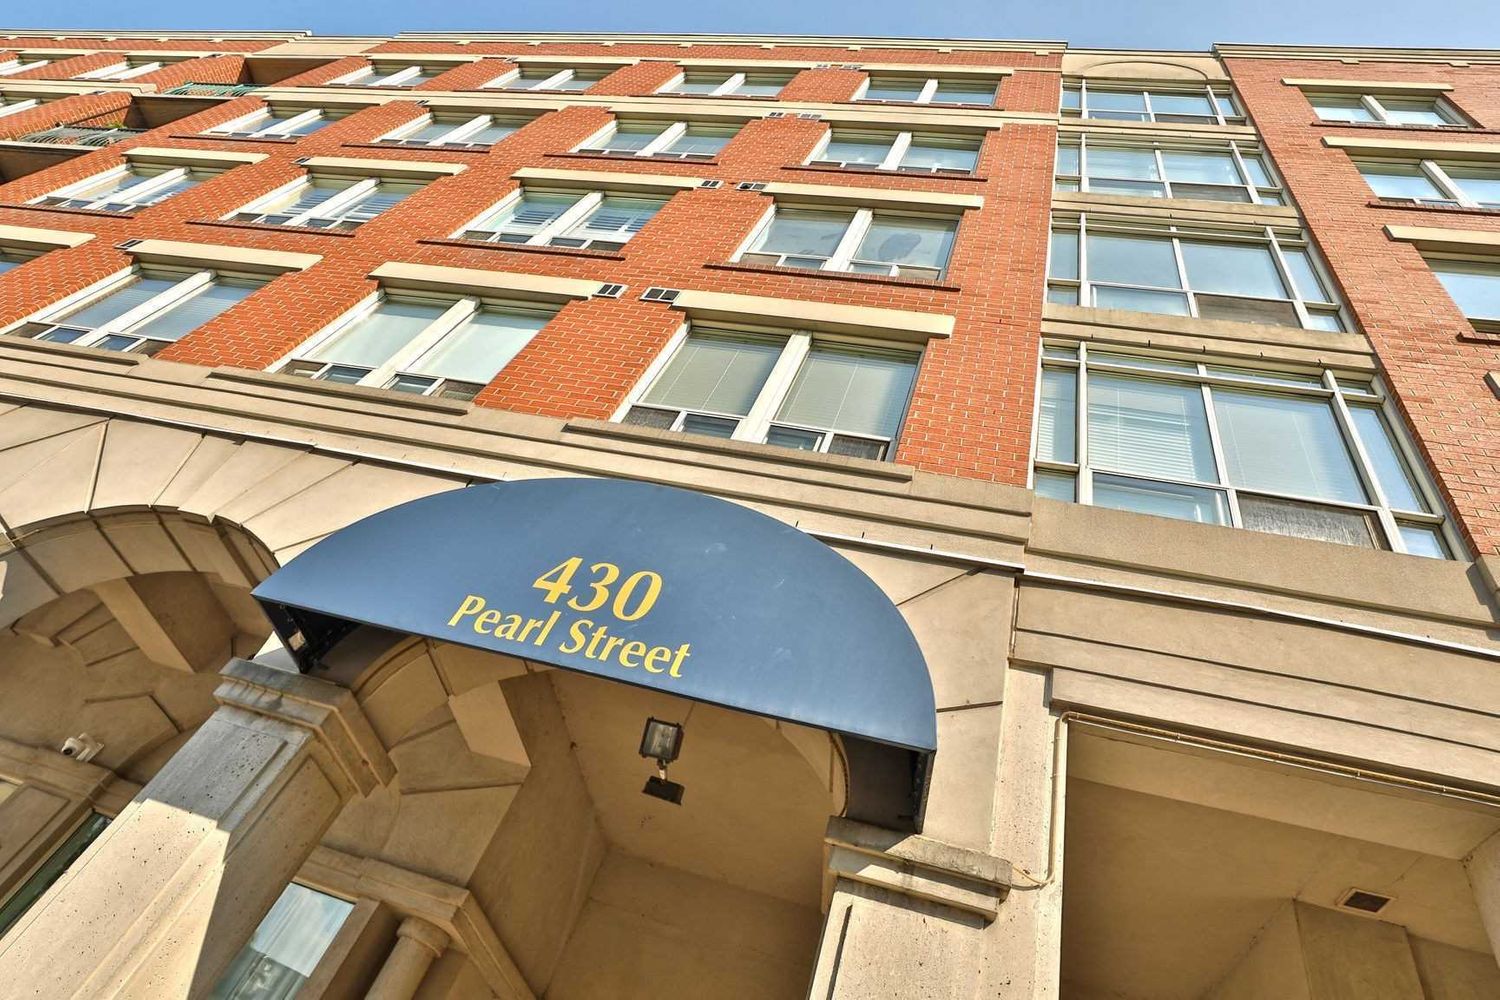 430 Pearl Street. The Residences of Village Square is located in  Burlington, Toronto - image #2 of 2